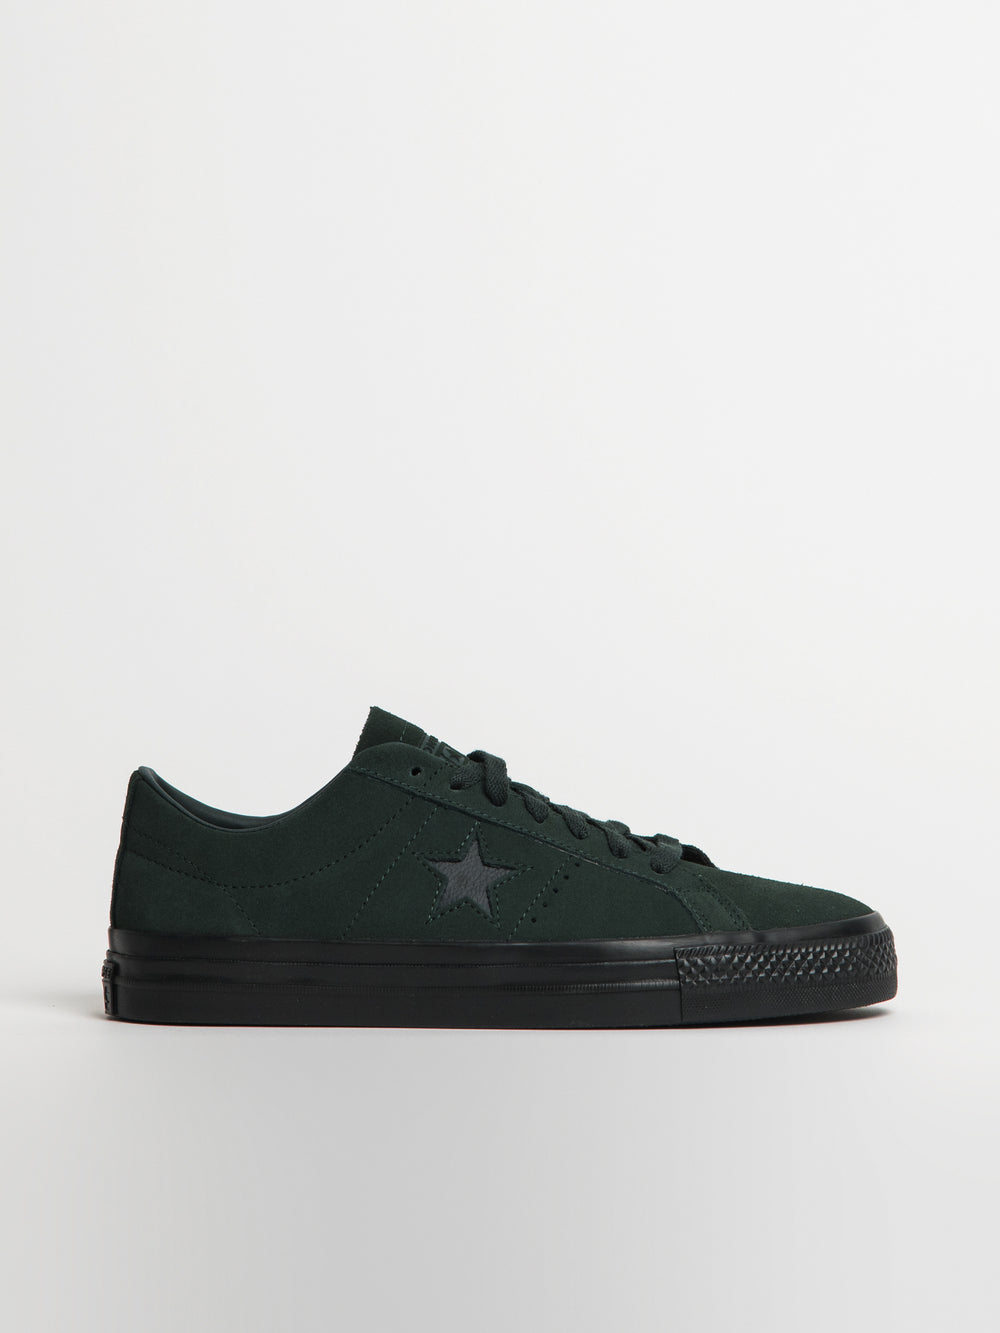 MENS CONVERSE ONE STAR PRO CLASSIC SUEDE